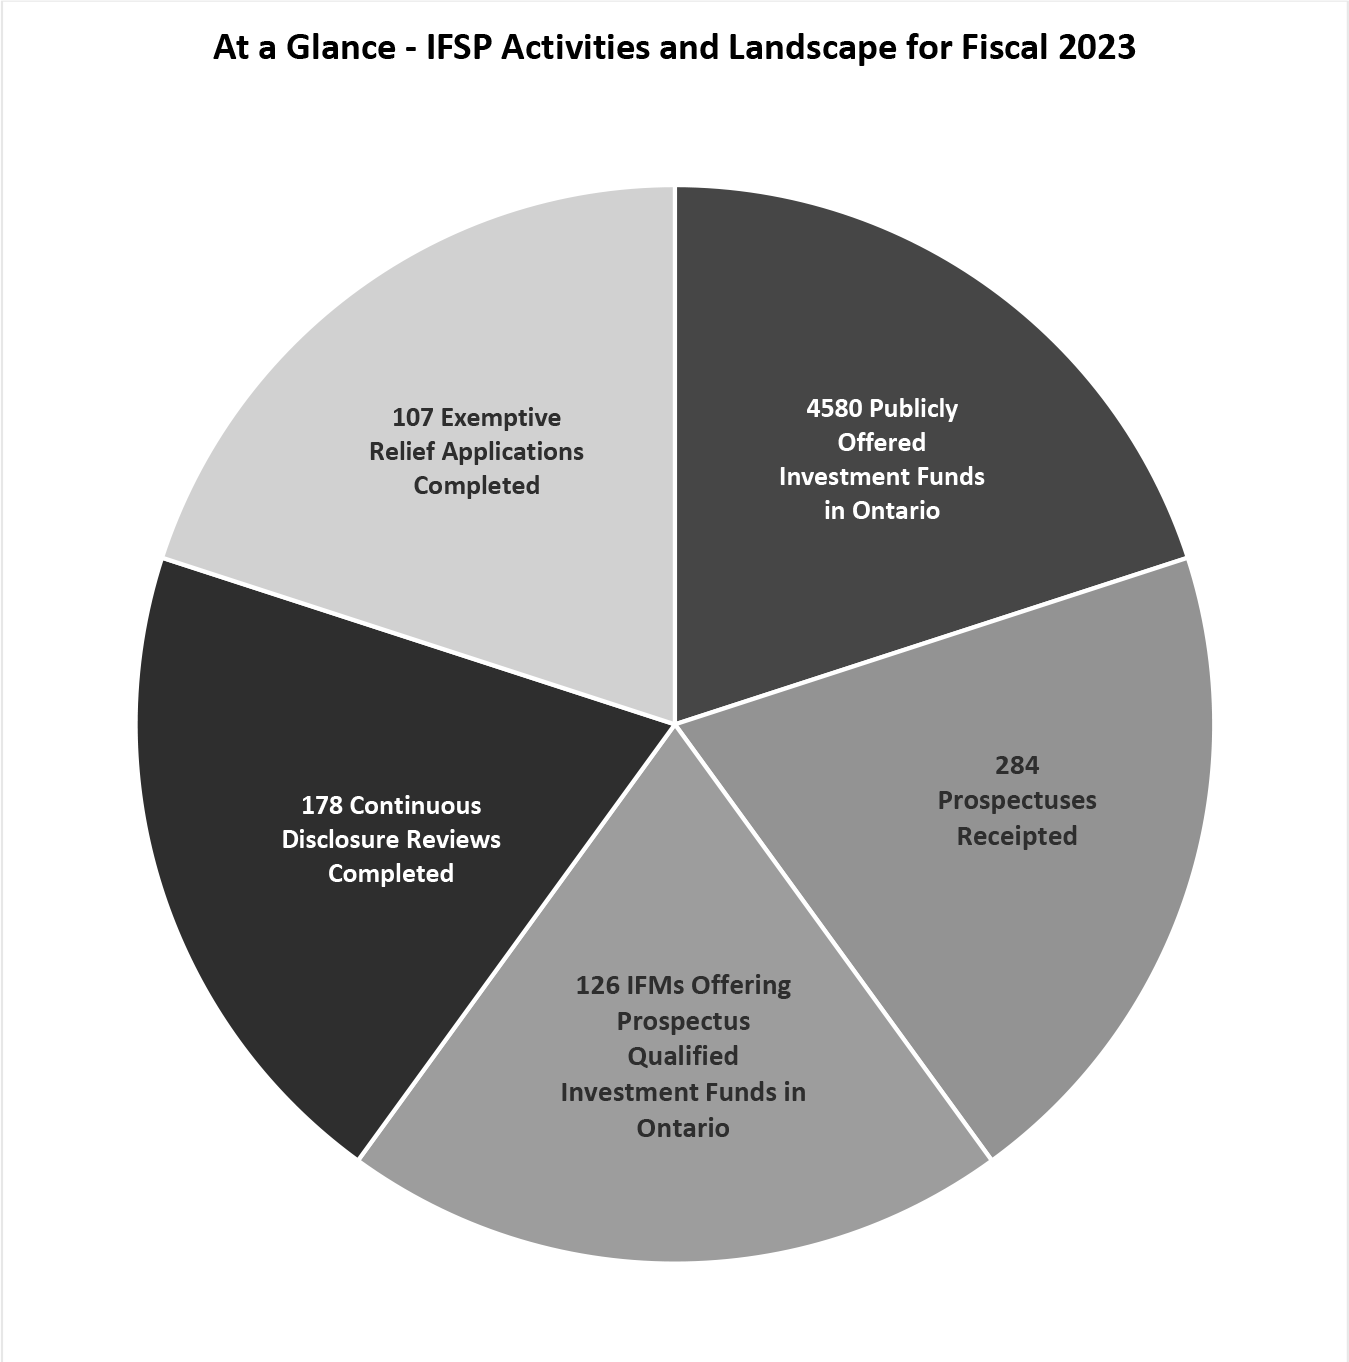 At a Glance -- IFSP Activities and Landscape for Fiscal 2023